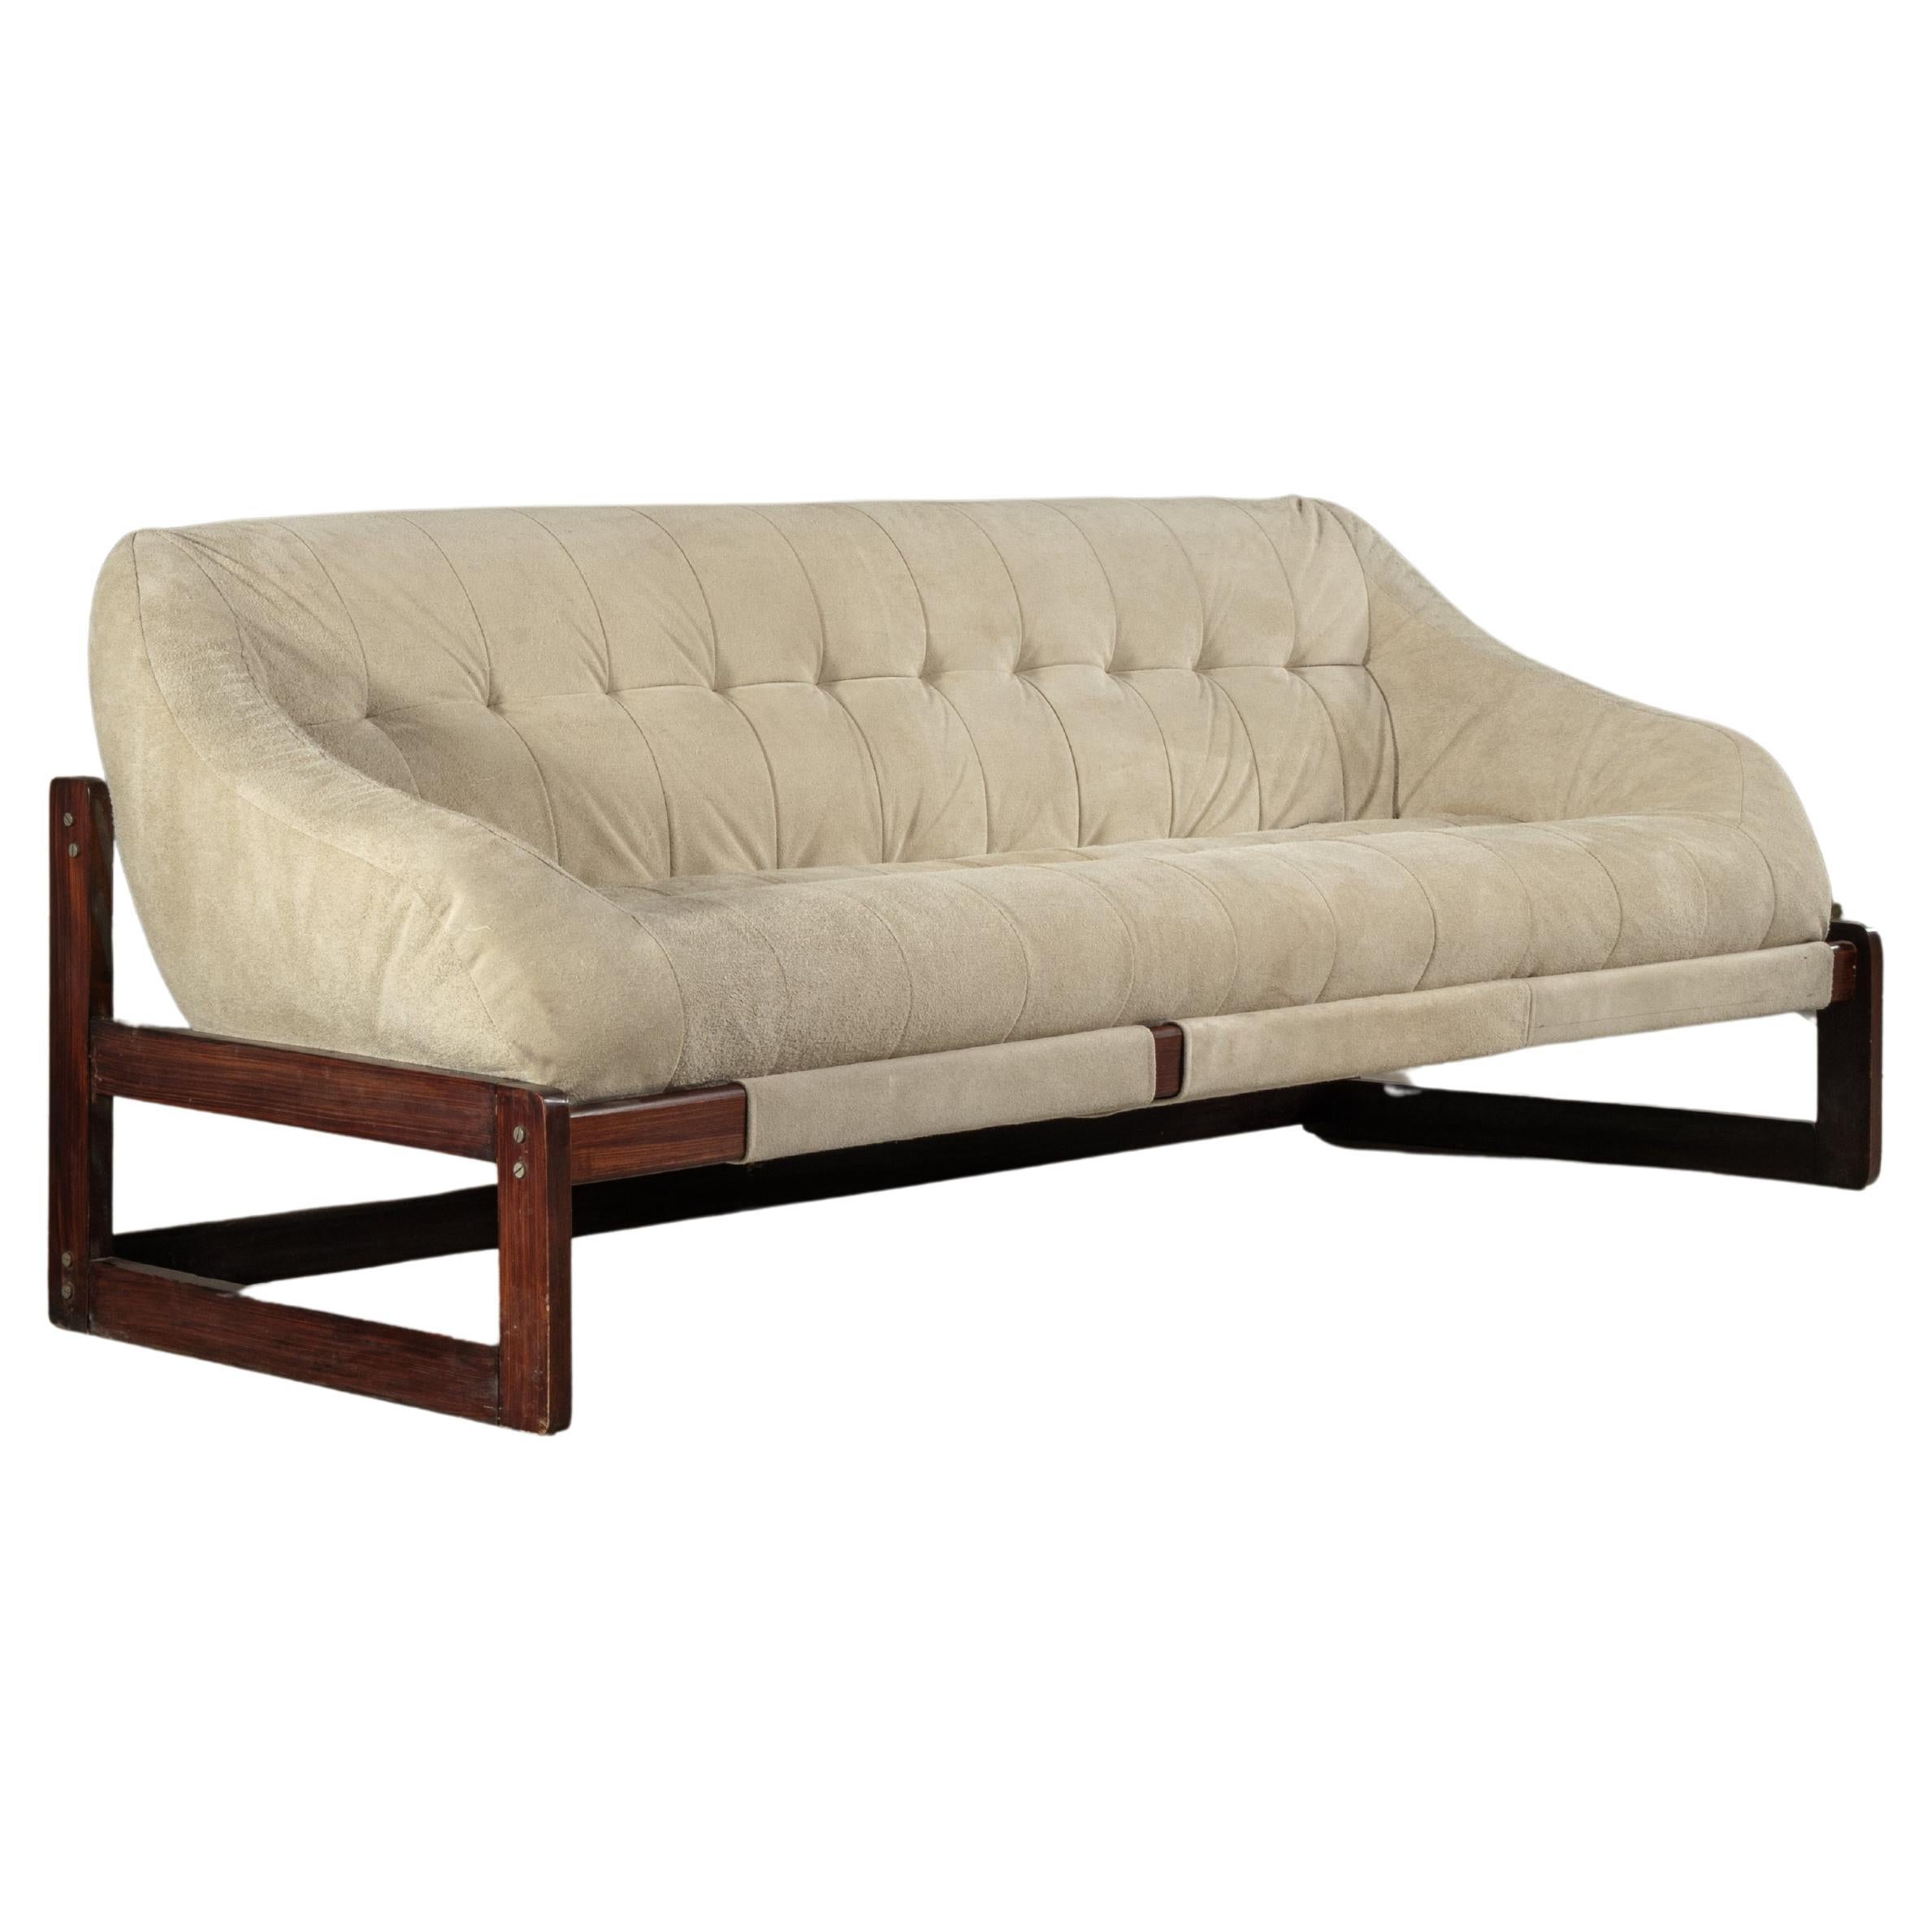 Architectural Sofa in Hardwood, by Percival Lafer, Brazilian Mid-Century Modern For Sale